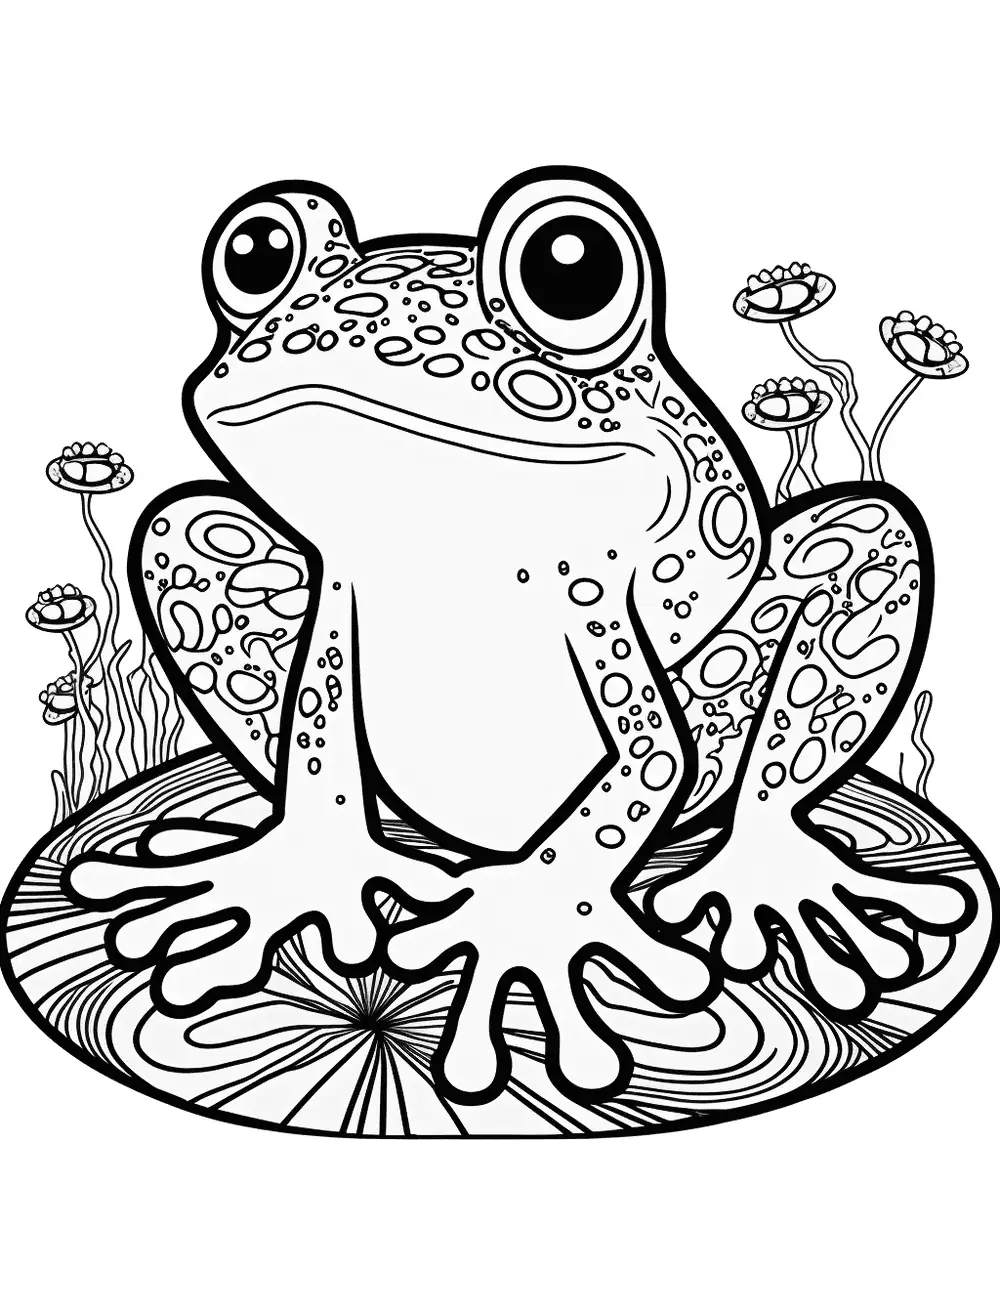 Trippy Frog Coloring Page - A trippy, psychedelic-style frog with bright colors and abstract shapes